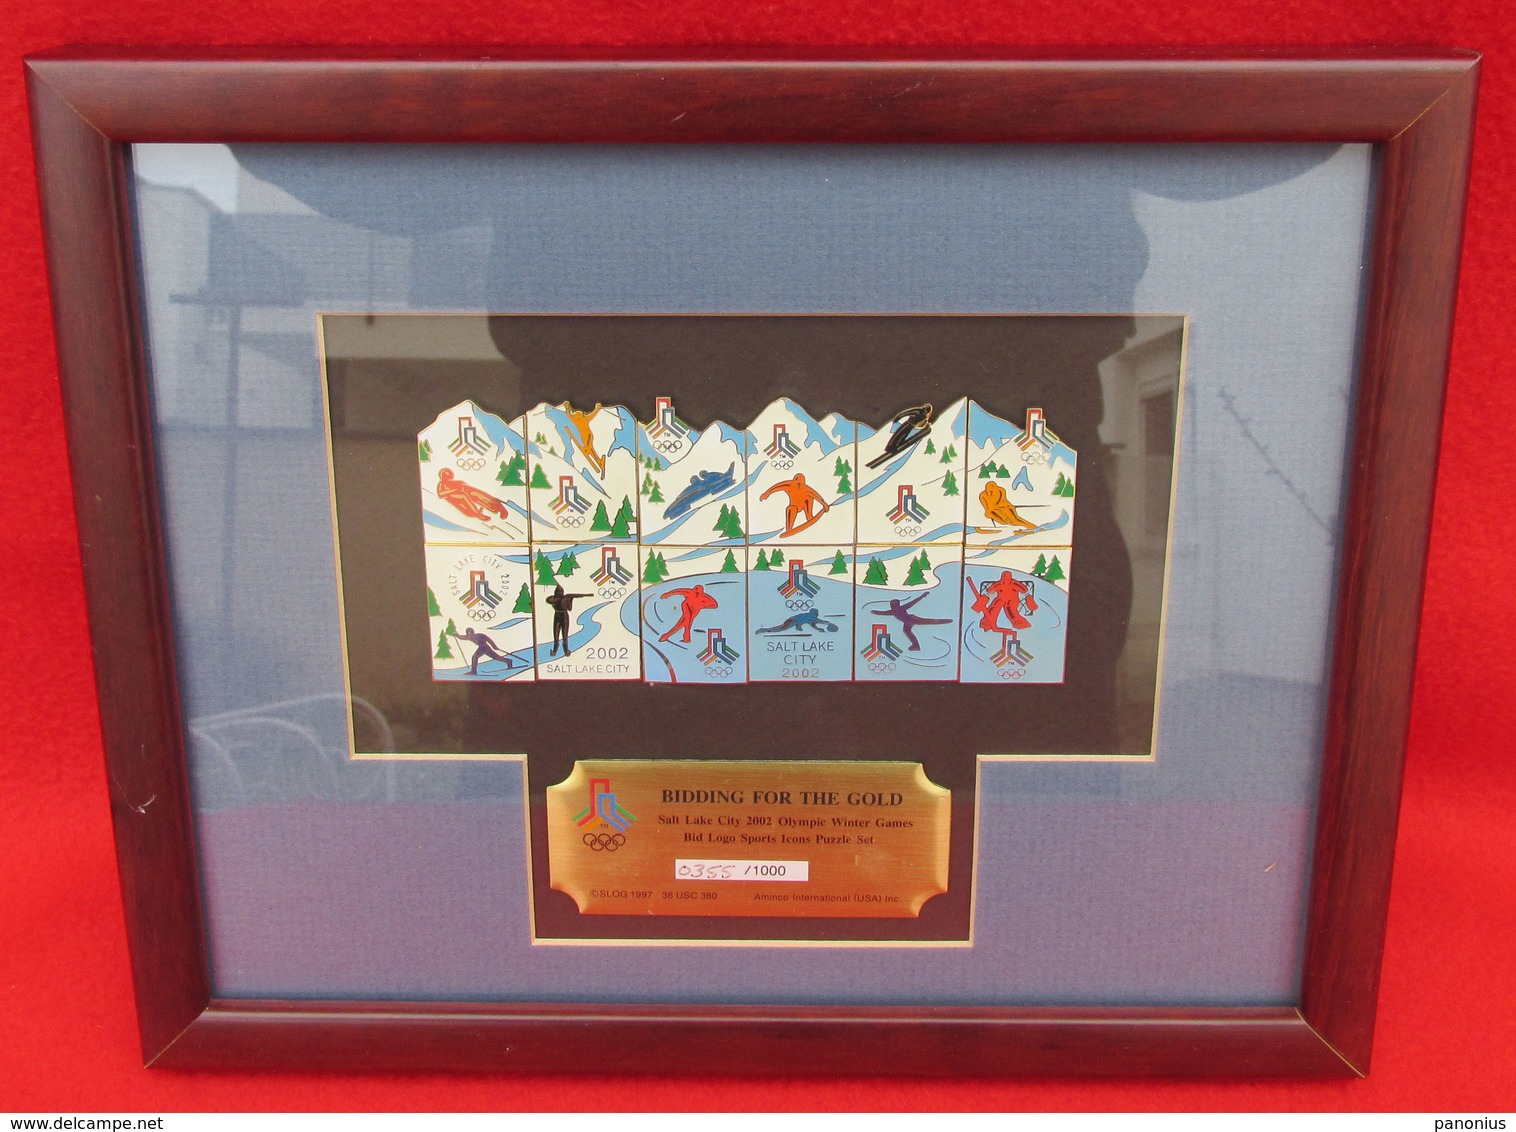 OLYMPIC WINTER GAMES SALT LAKE CITY 2002 UNITED STATES PUZZLE SET FRAMED PINS BADGES!!! - Apparel, Souvenirs & Other